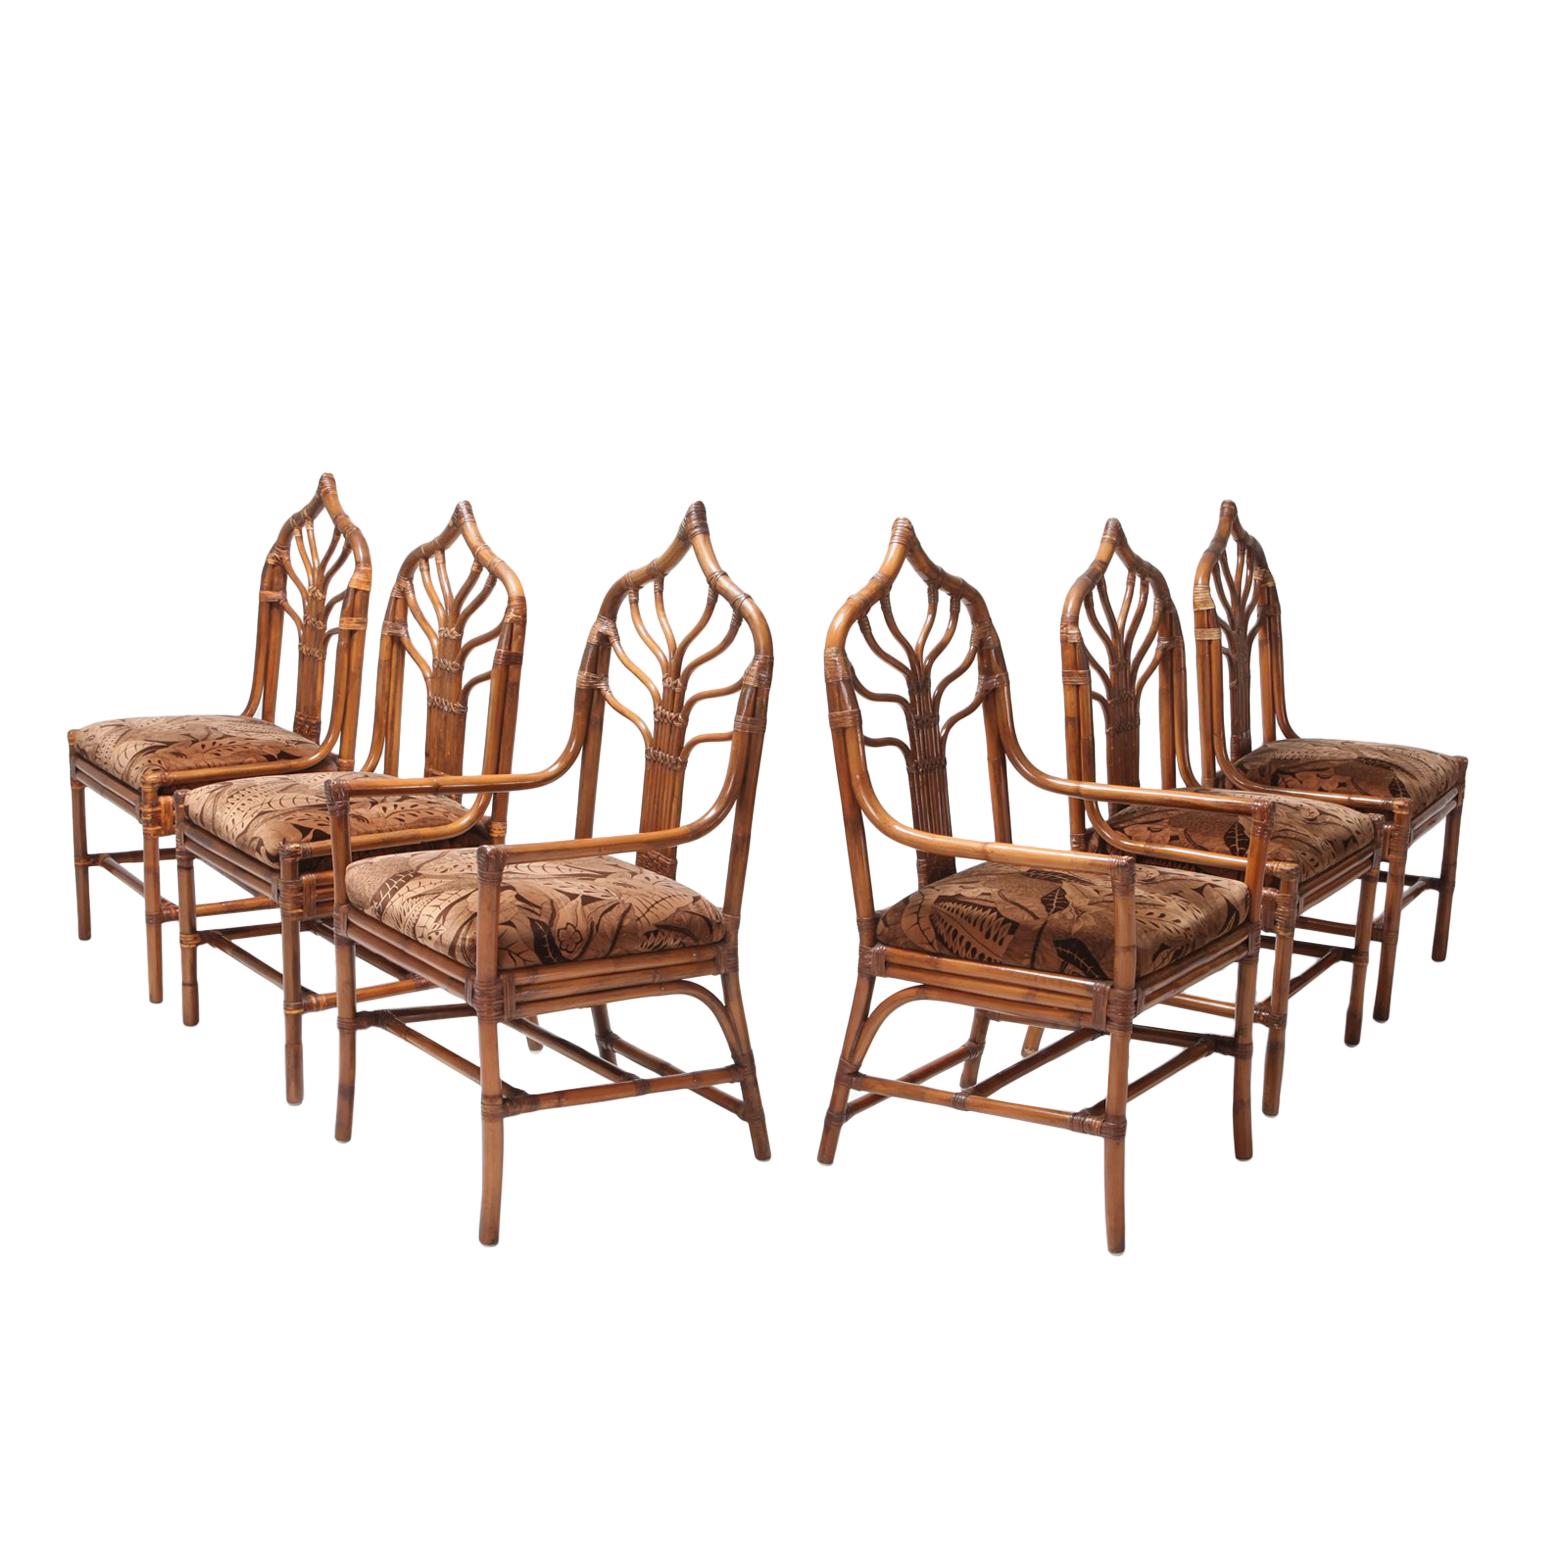 Rattan bamboo dining chairs with floral original upholstery, Italy, 1970s
Metropolitan chic tropicalist dining chairs 
style Vivai del Sud, Henry Olko, Franco Albini
A set of 6 with 4 chairs and 2 armchairs. 
  

 